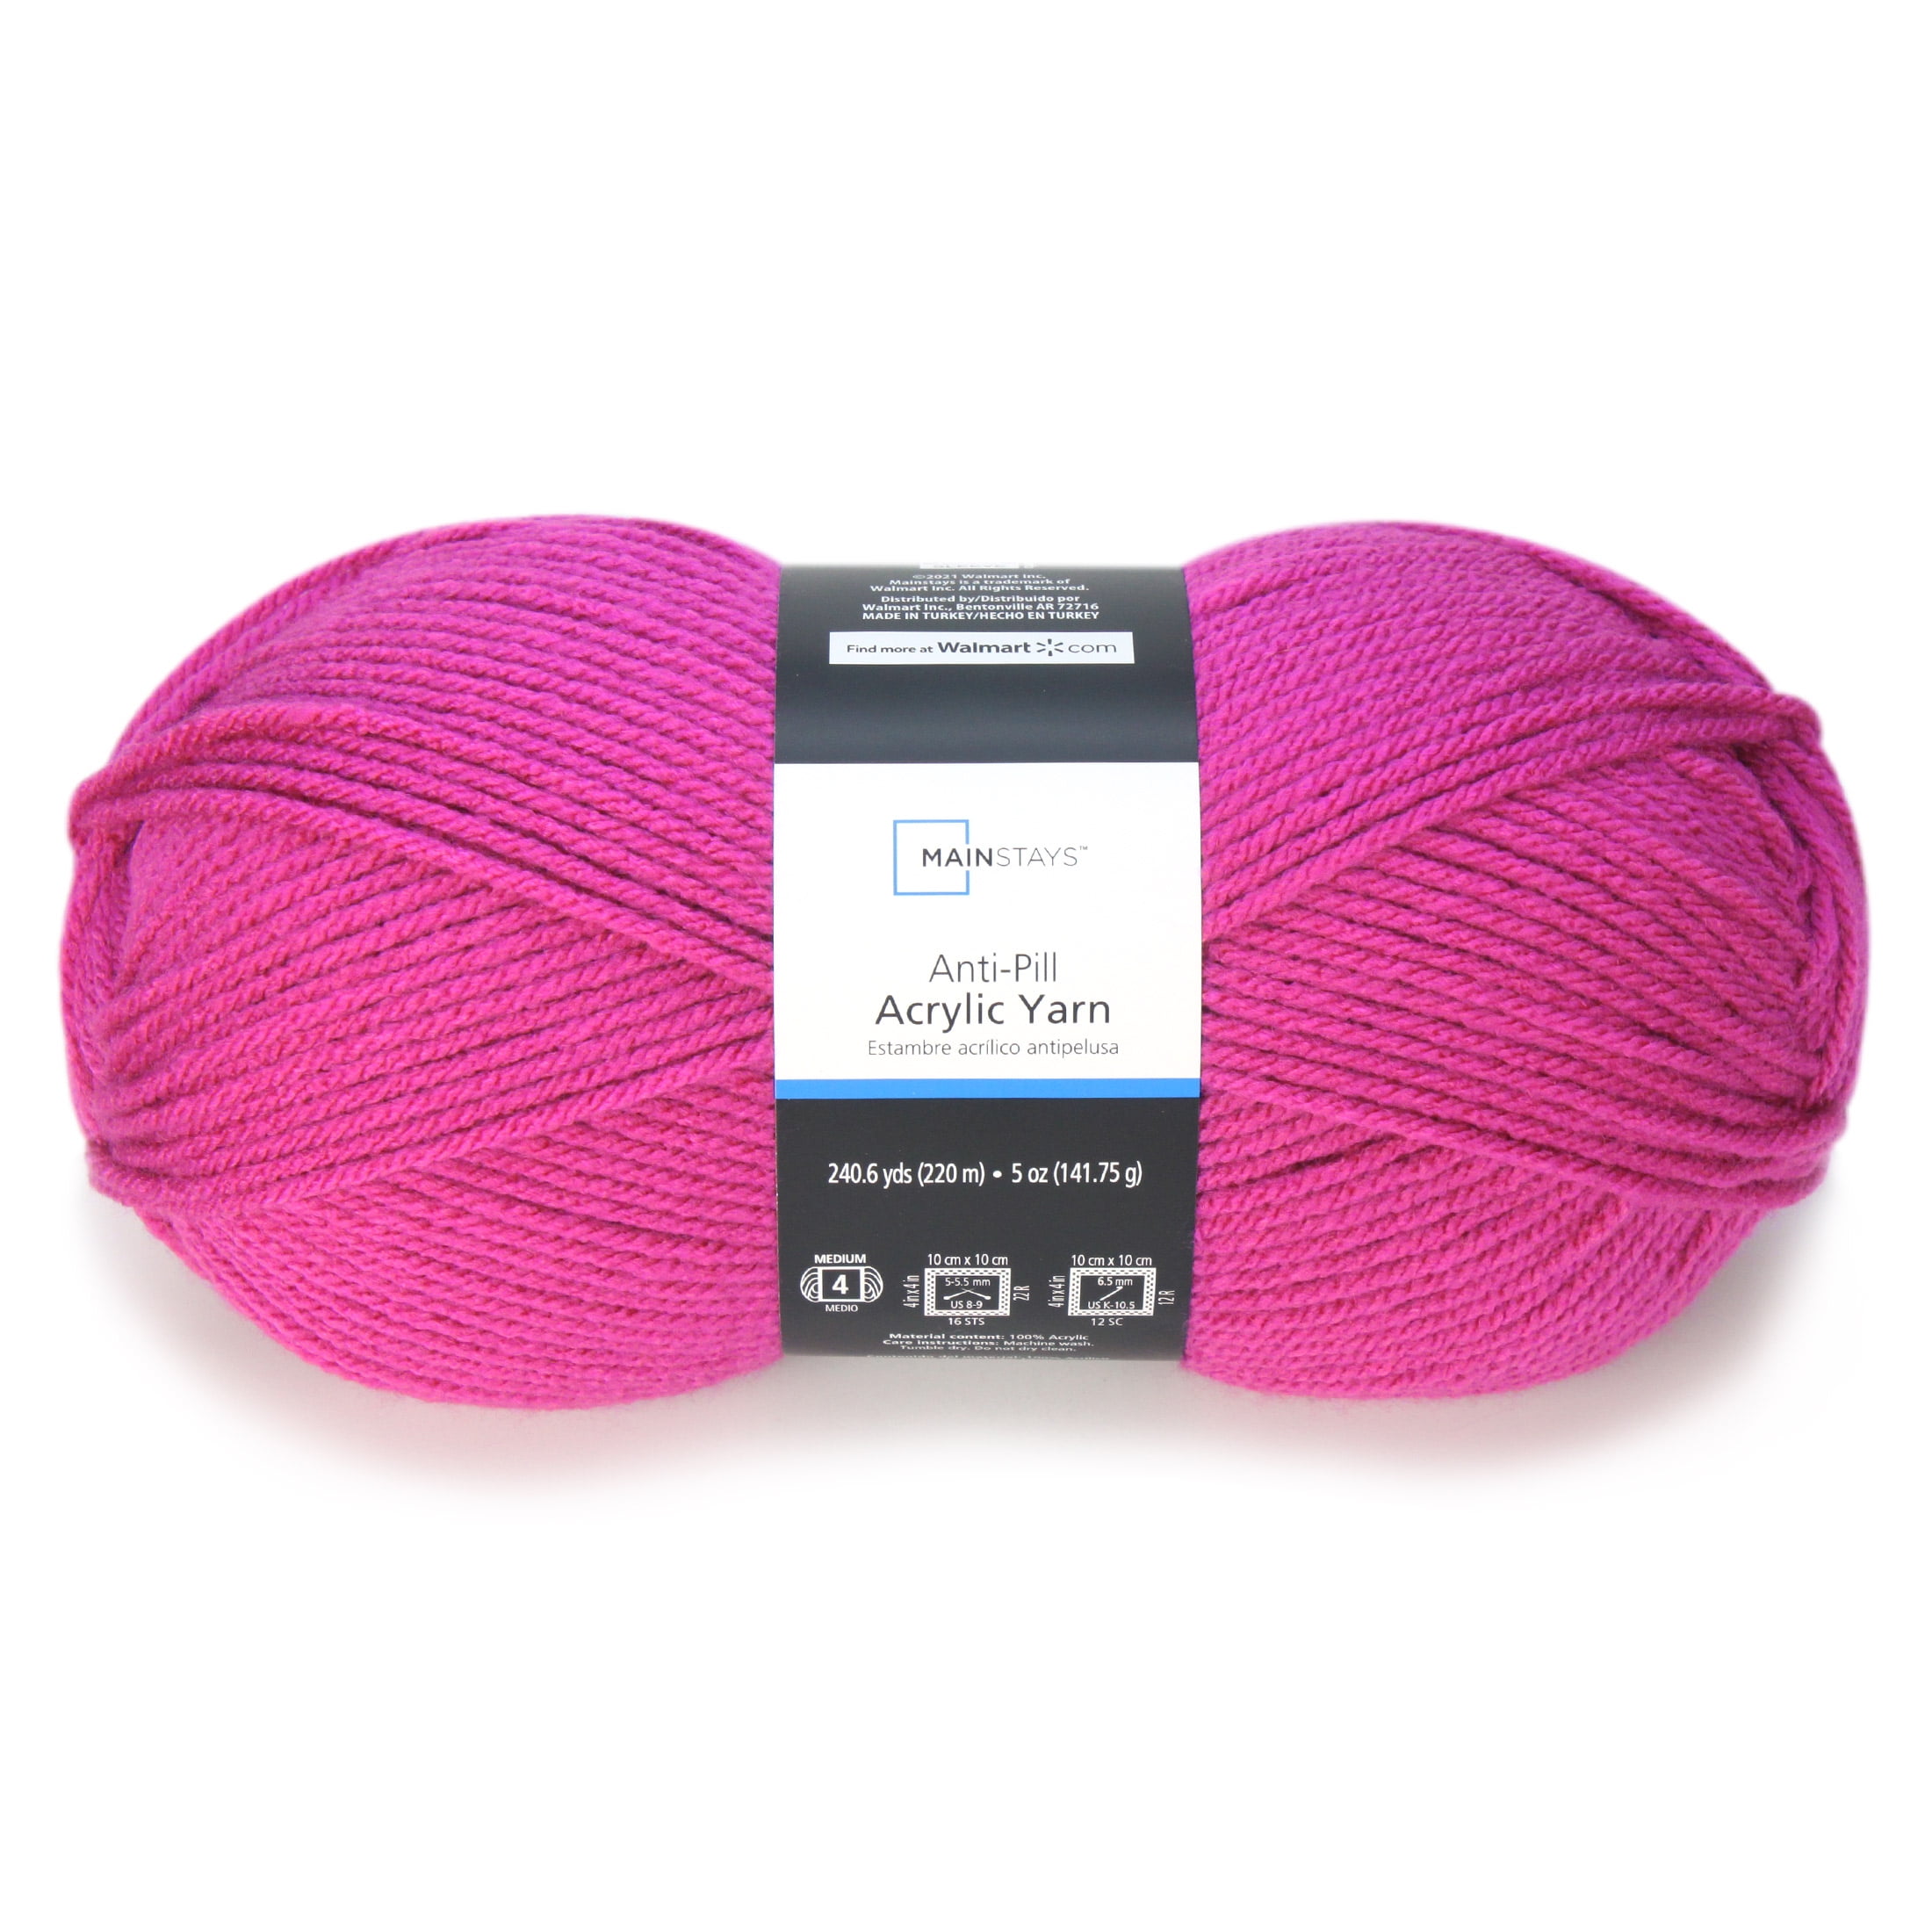  Pllieay 2x50g Packs Hot Pink and Red Yarn for